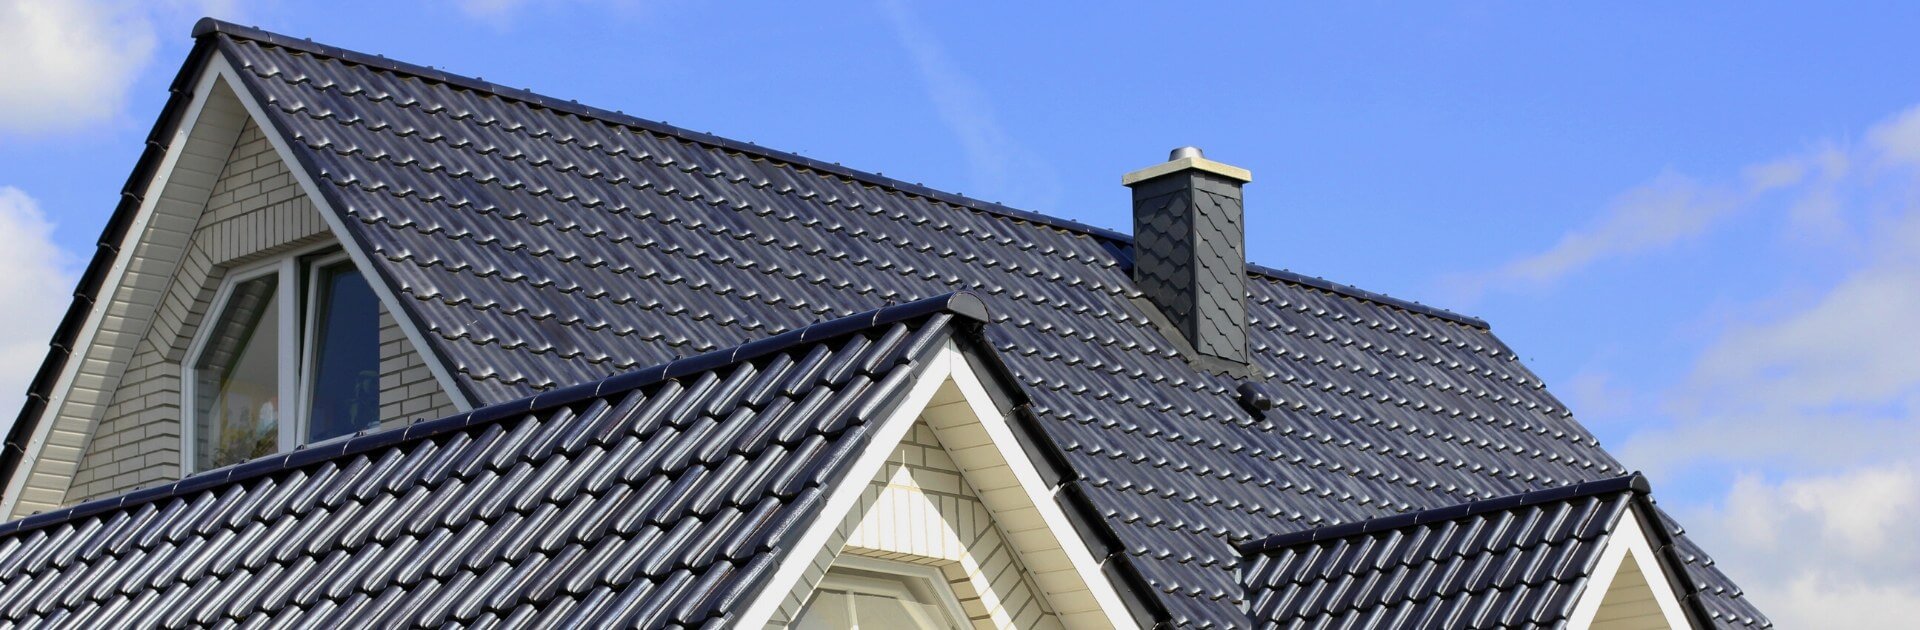 Roofing Services near you Brighte Financing Options